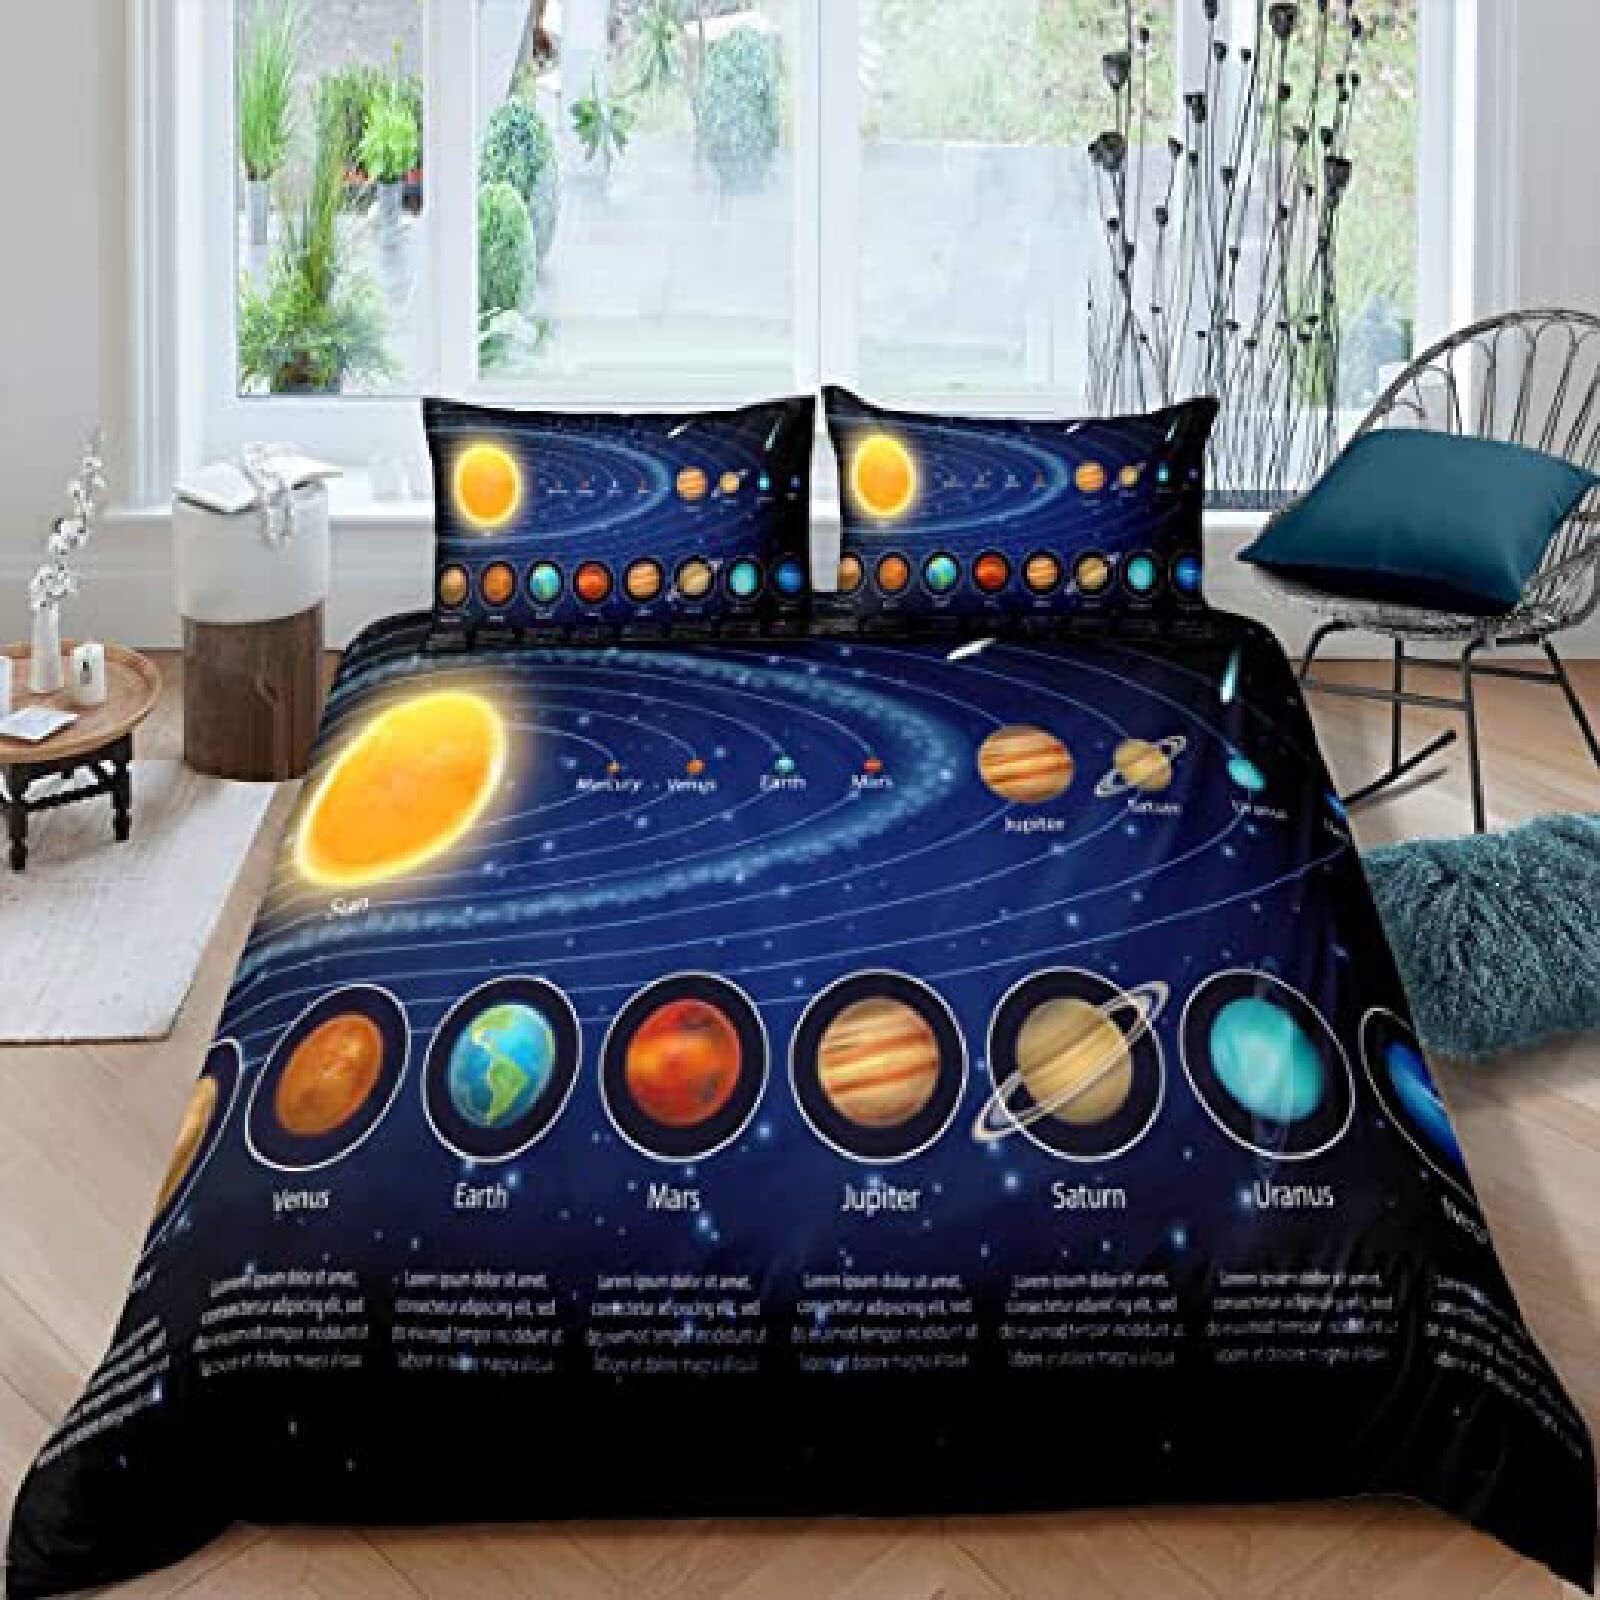 Solar System Duvet Cover Set Twin King Microfiber Outer Space Galaxy Bedding Set Universe Planet Astronomy King Size Quilt Cover